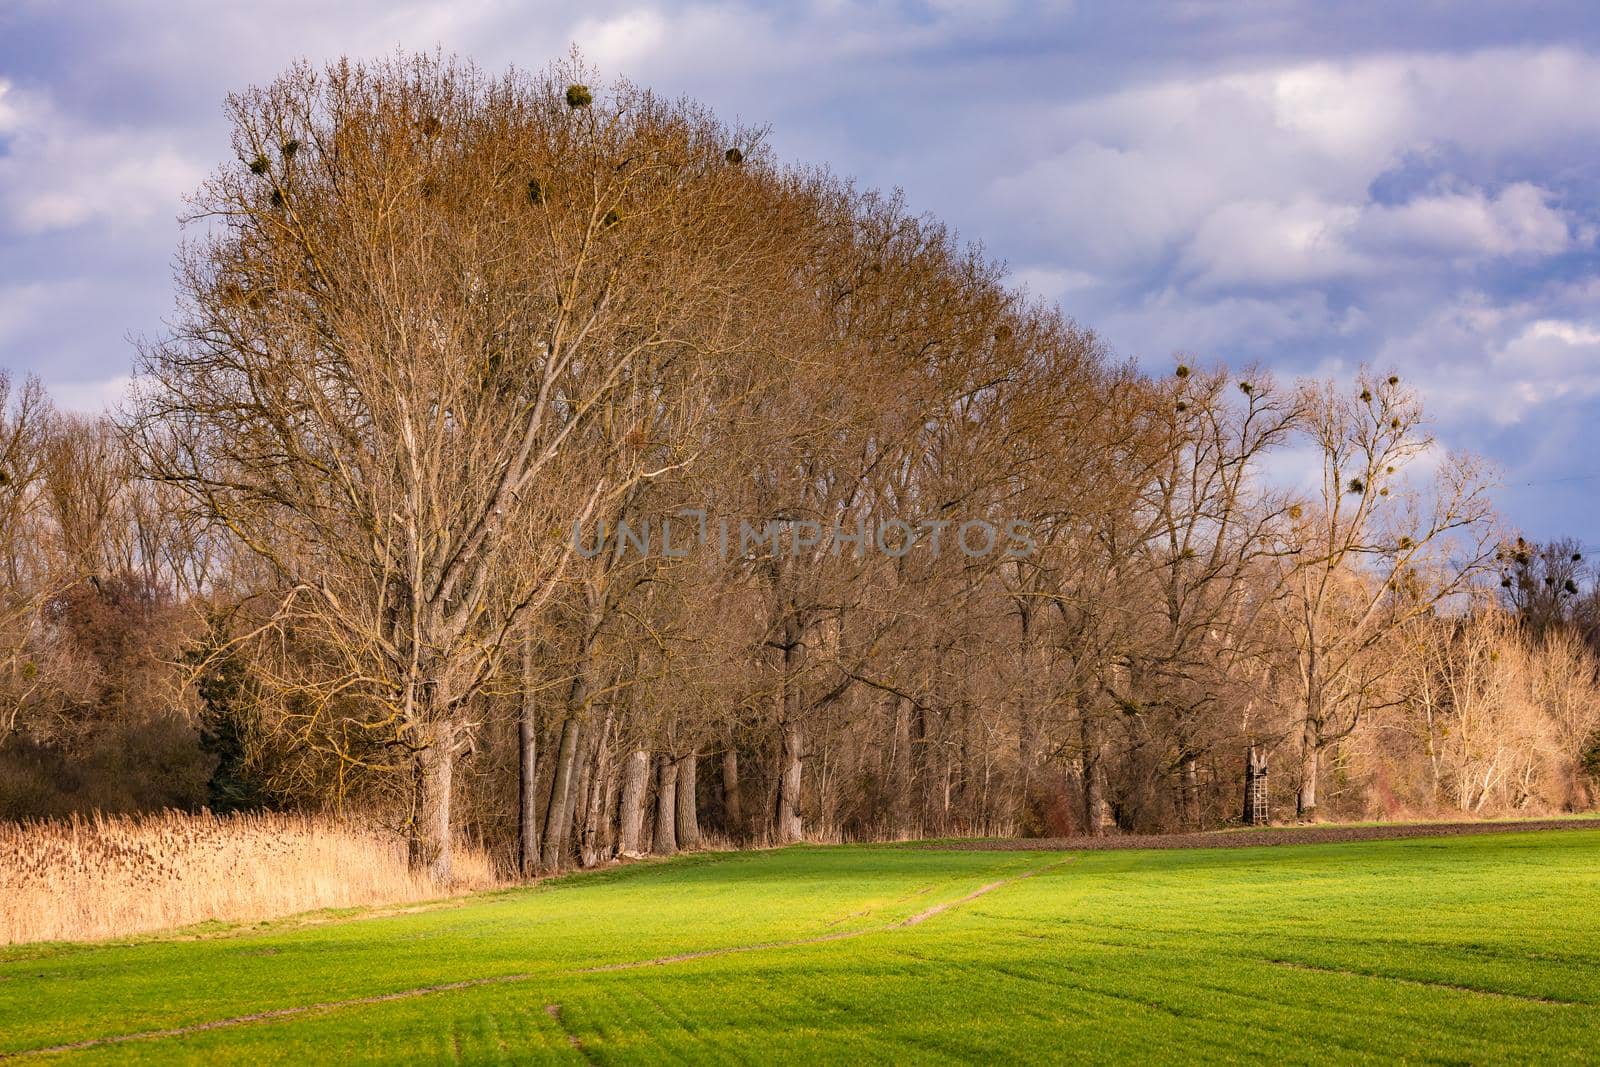 An agricultural field is lined with large trees in winter